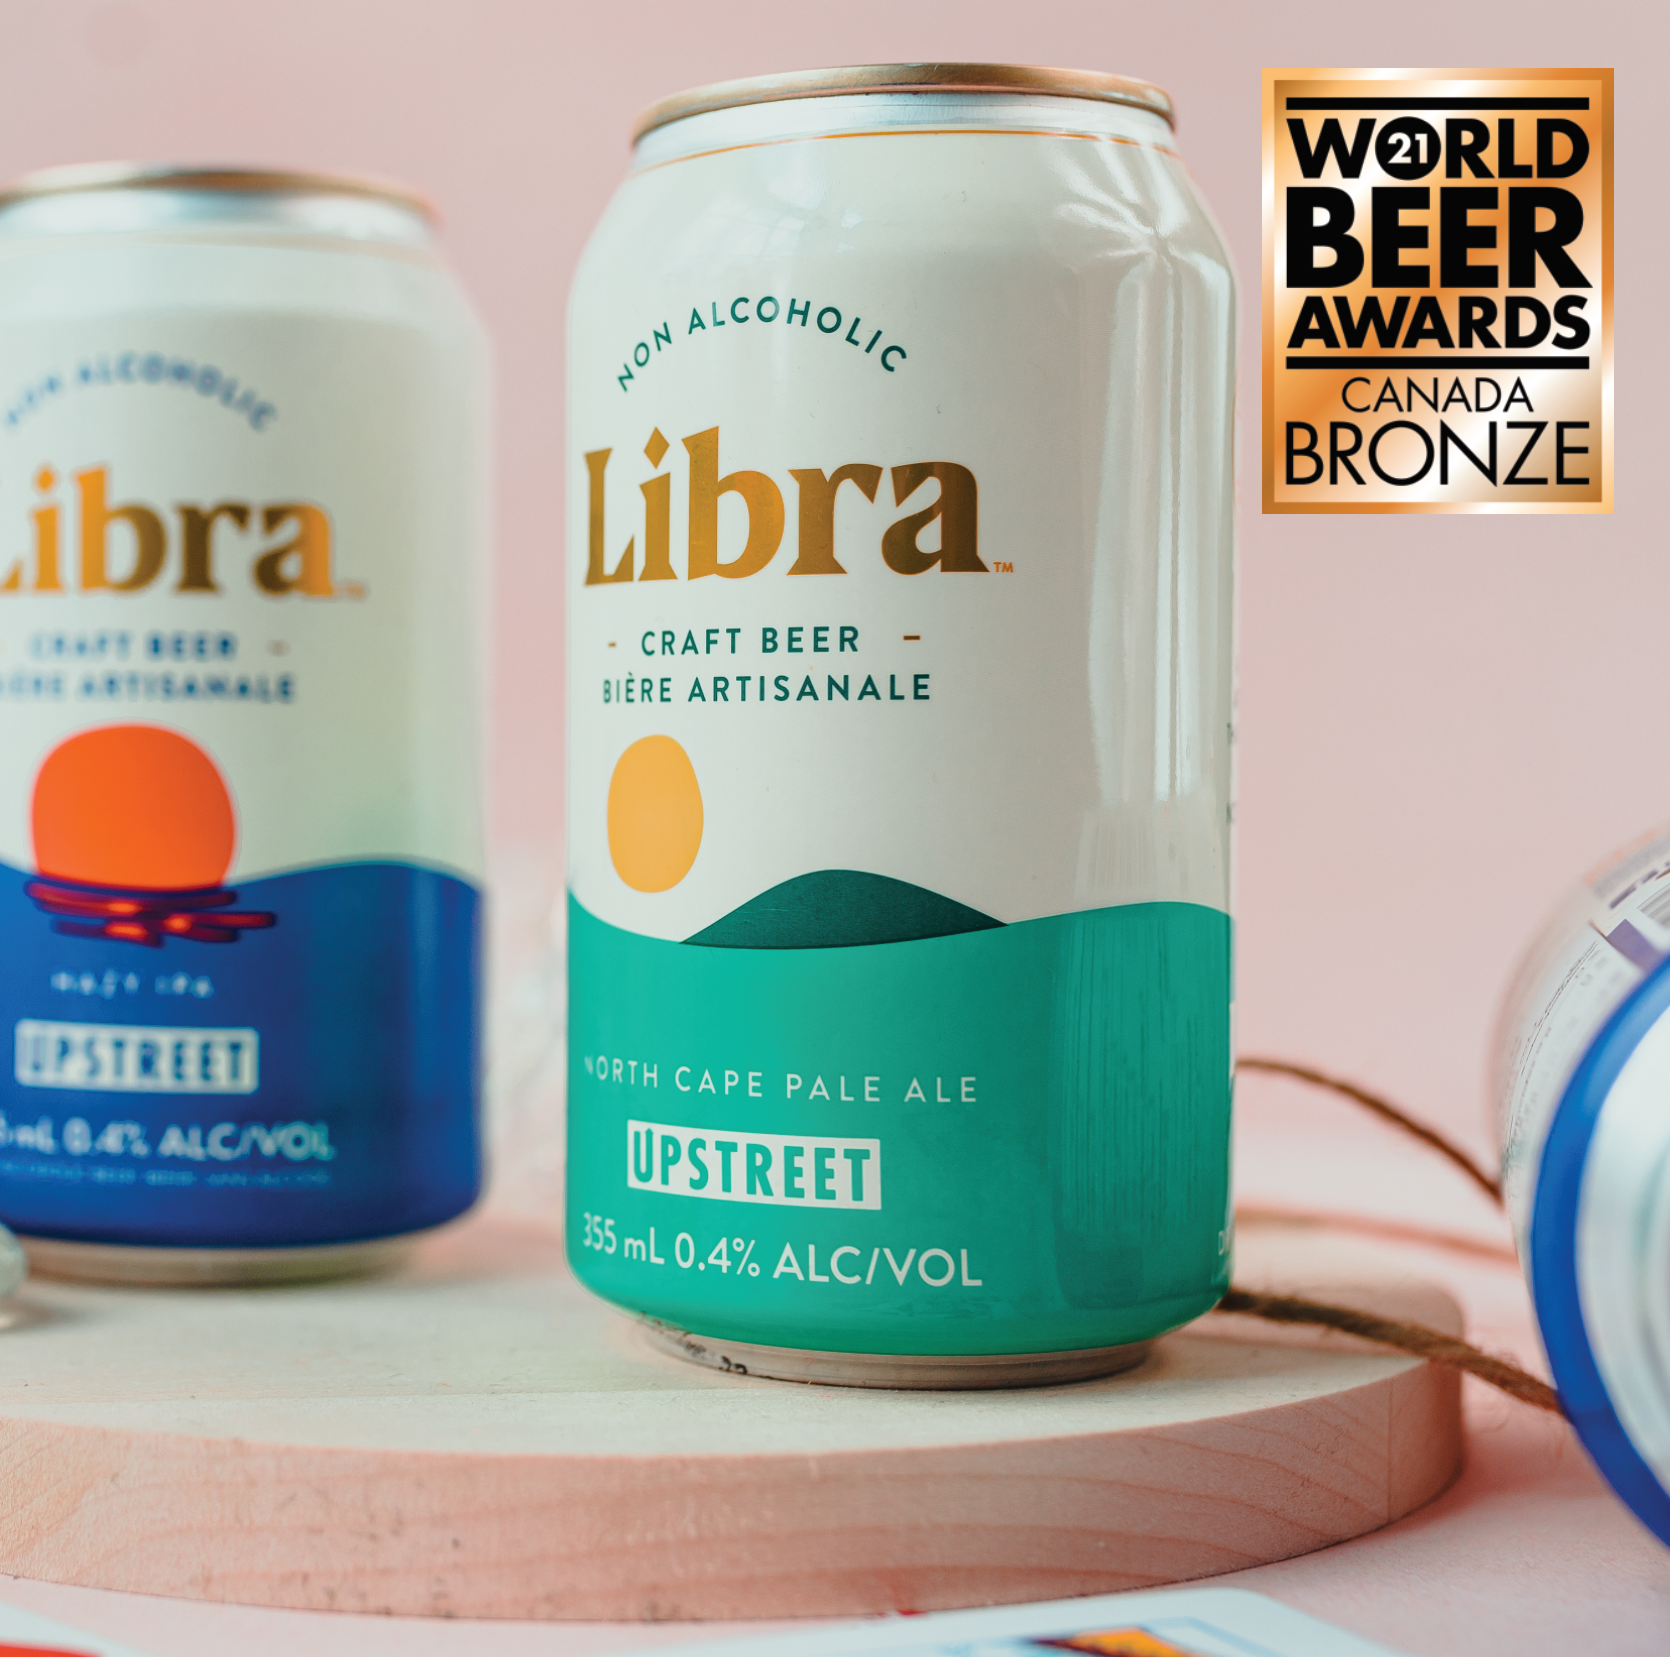 Libra won TWO Bronze medals at the world beer awards!